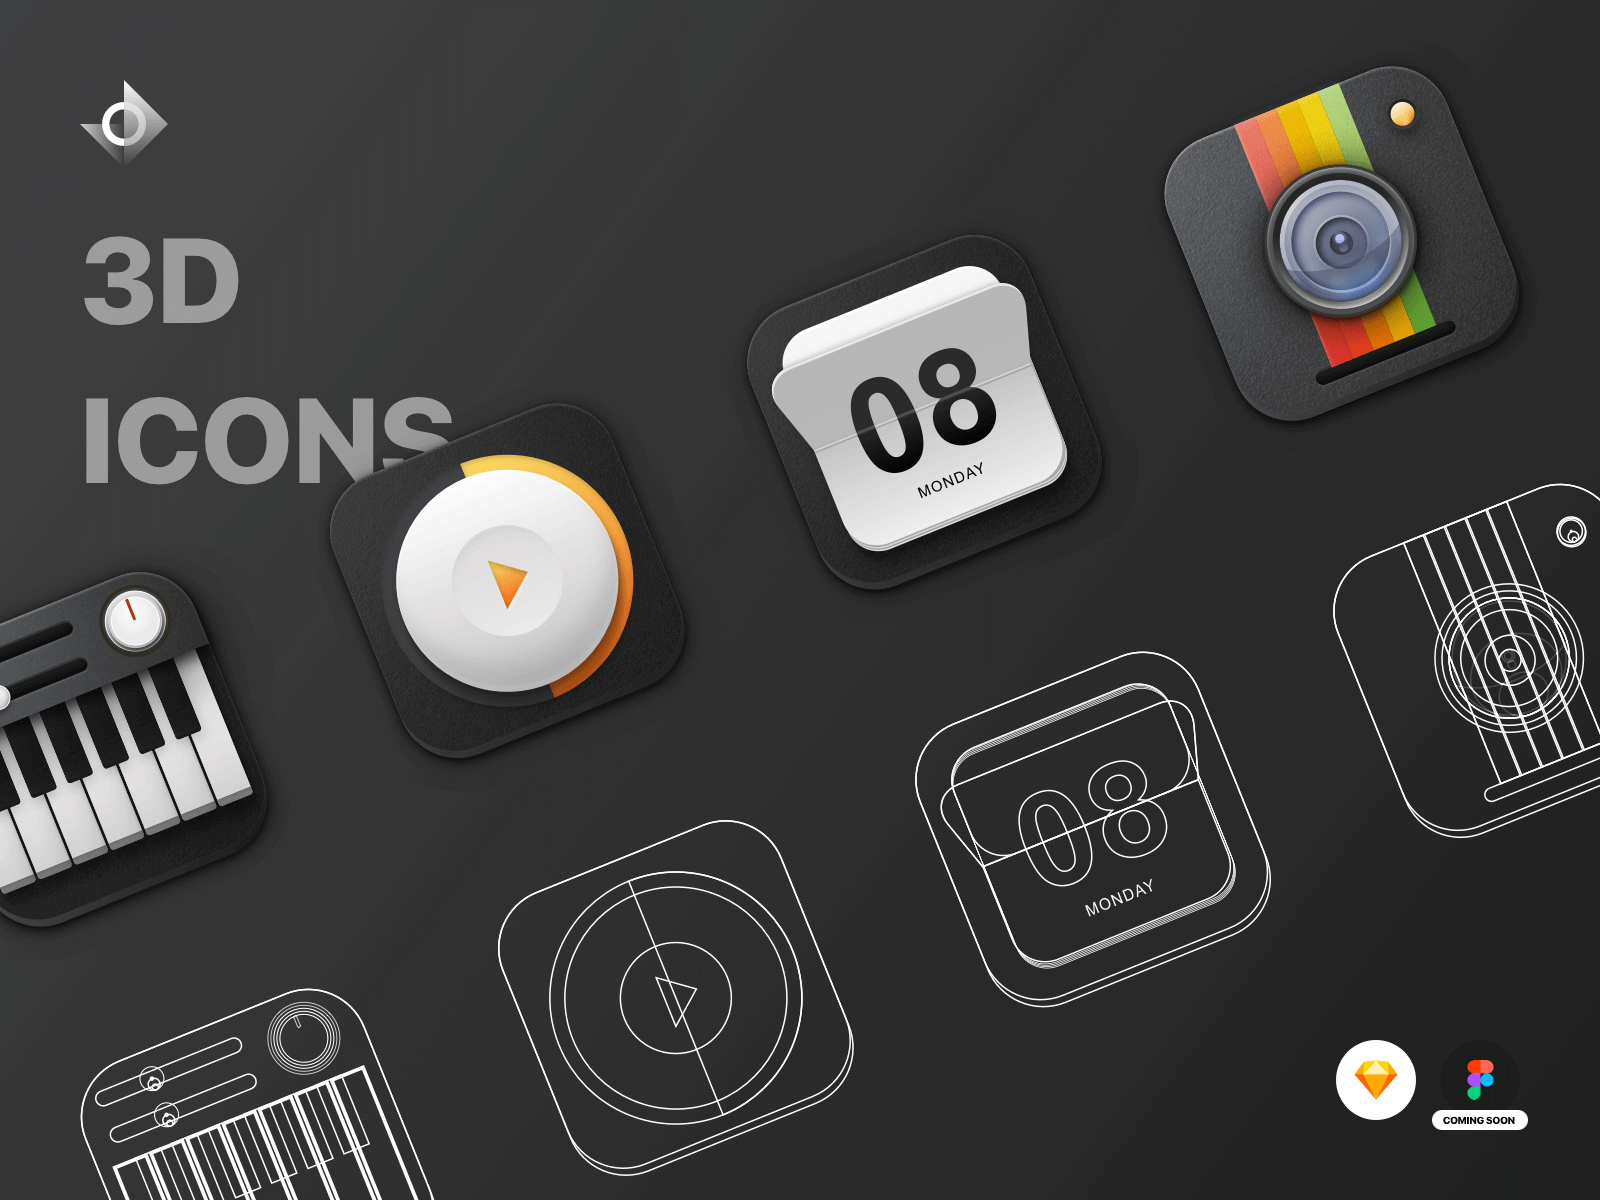 A mockup of four 3D skeuomorphic icons and their wireframe versions. The icons included are: piano, video button, calendar, and camera. 